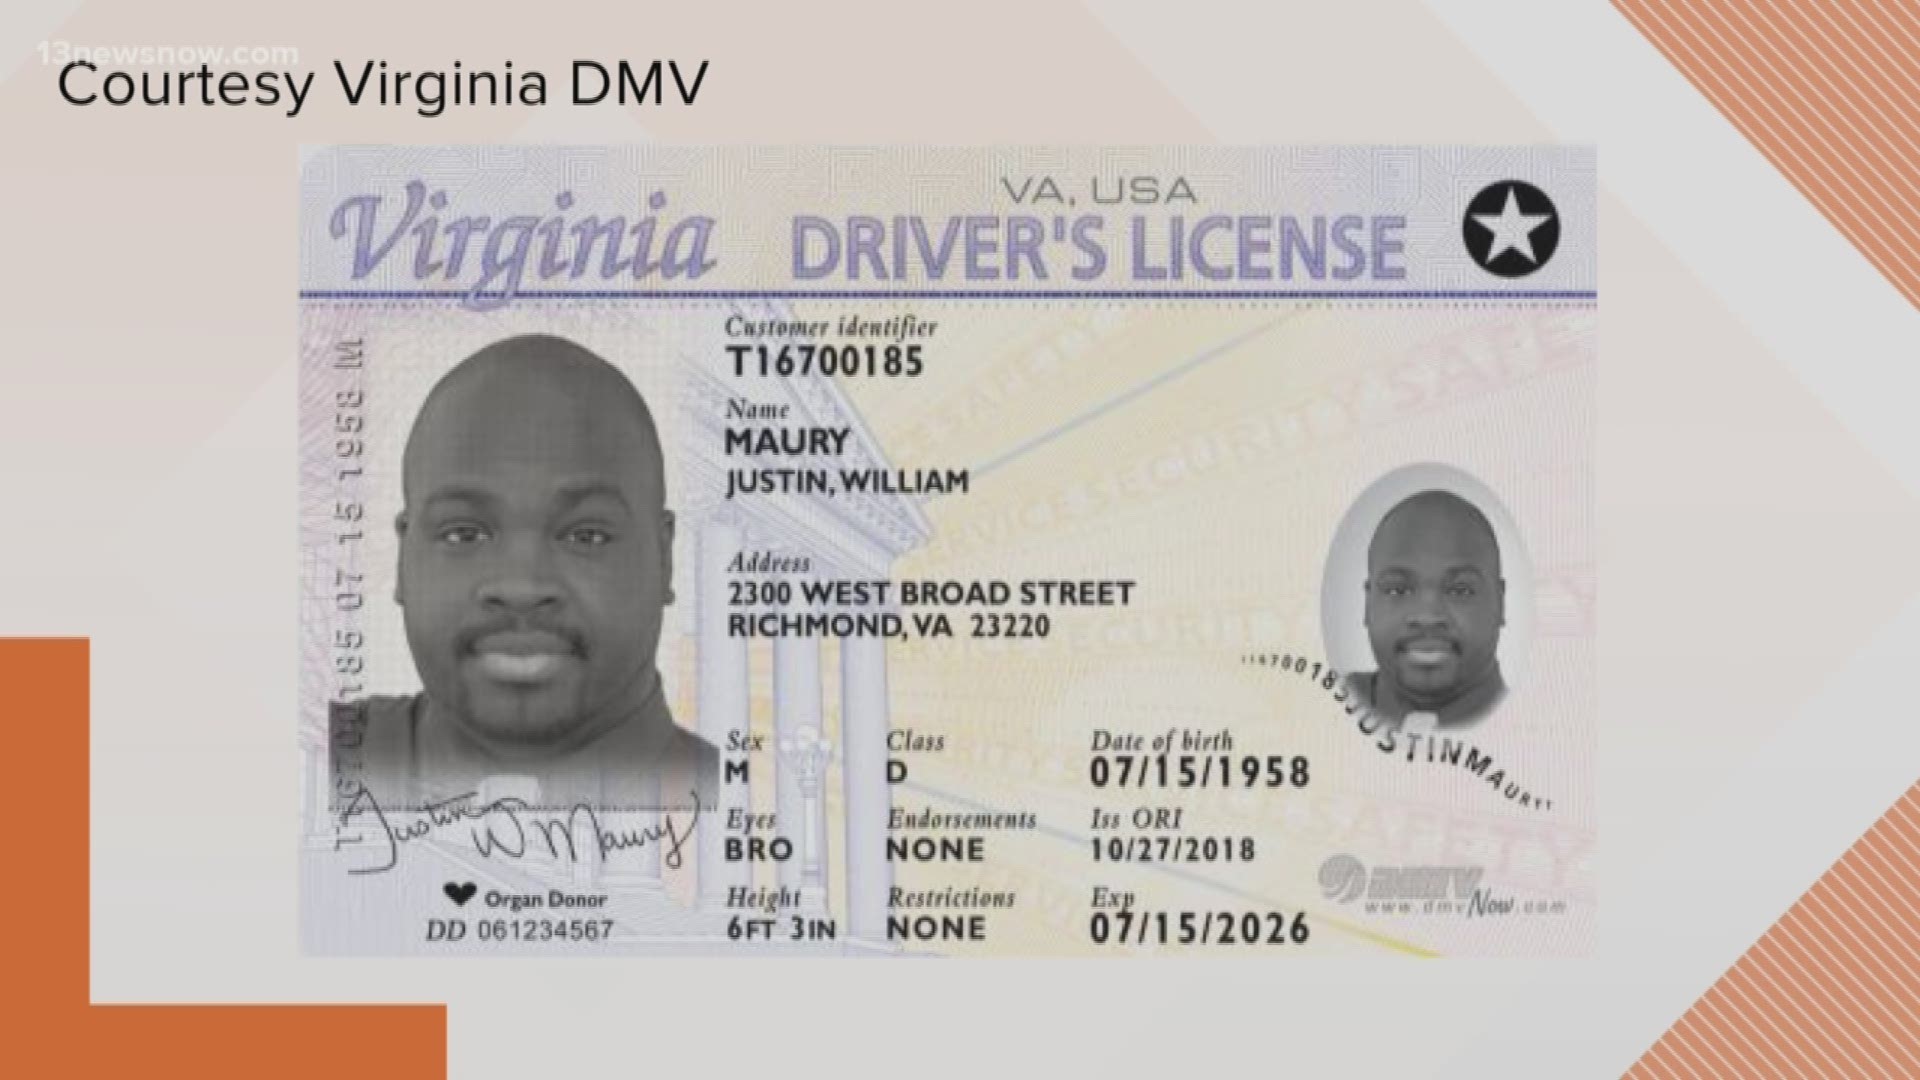 Driver's licenses that are REAL ID-compliant are currently optional, but will be mandatory beginning in 2020.